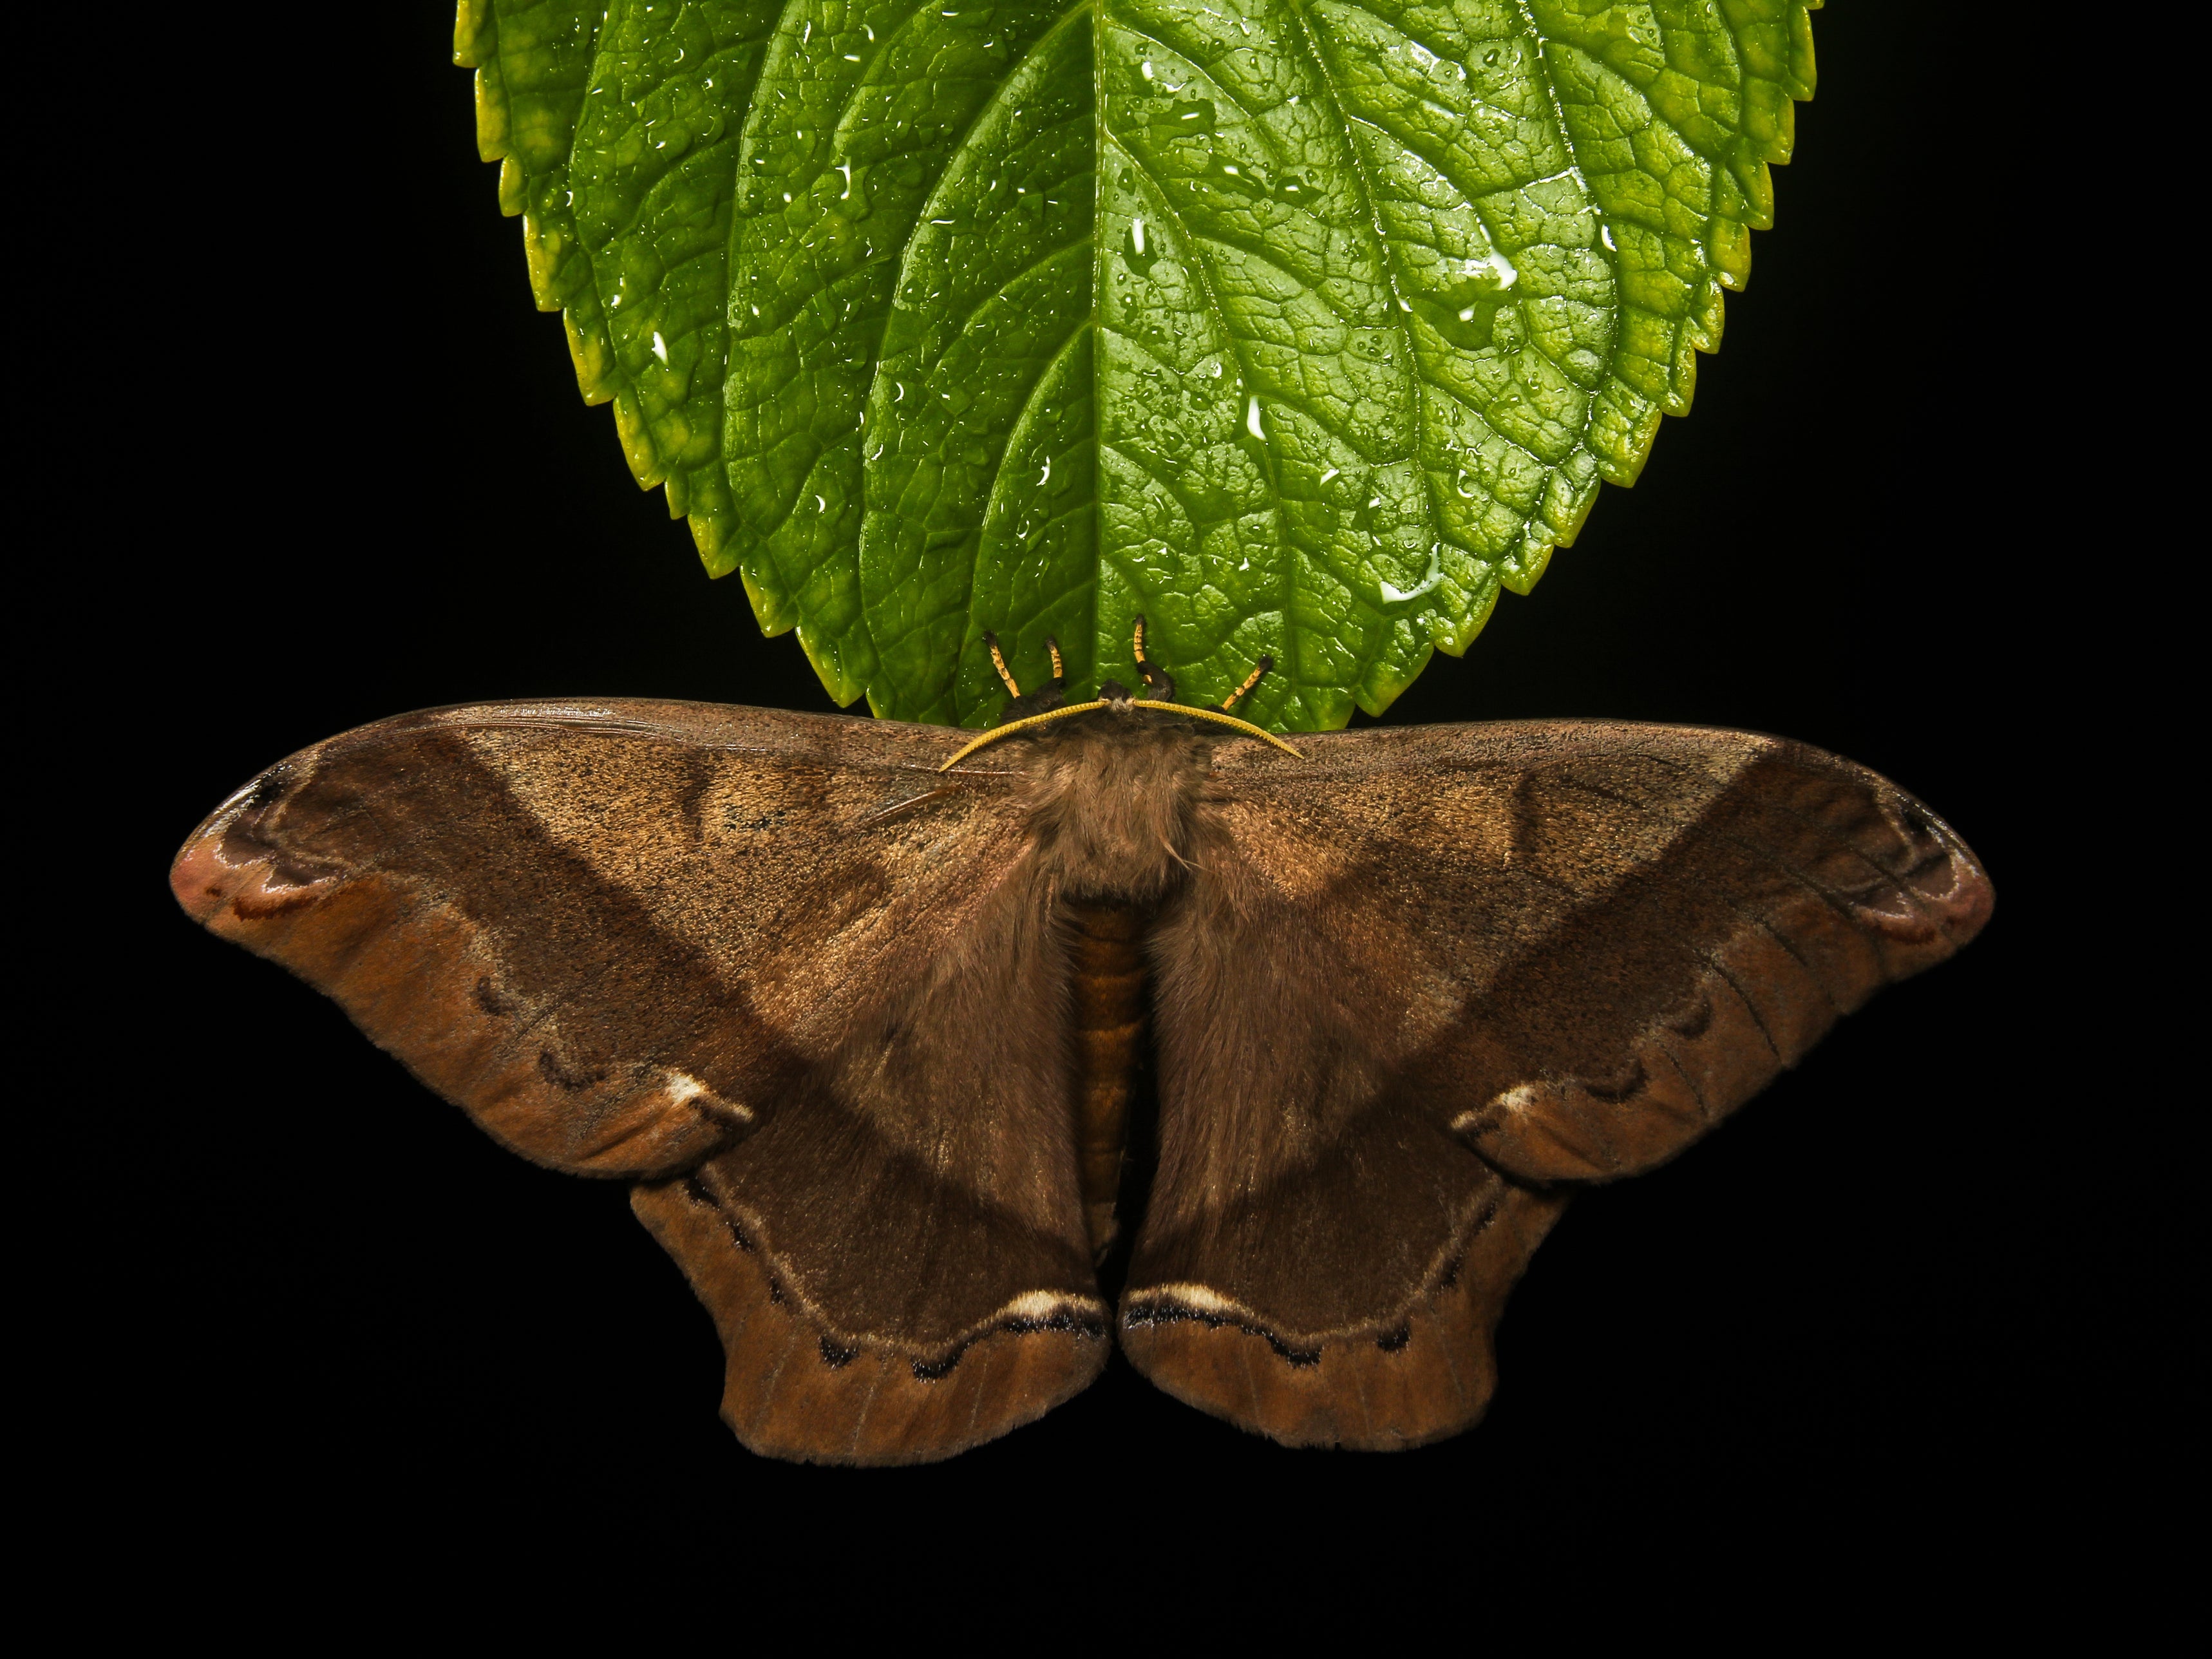 Climate change has already been implicated in the decline of moths in Costa Rica